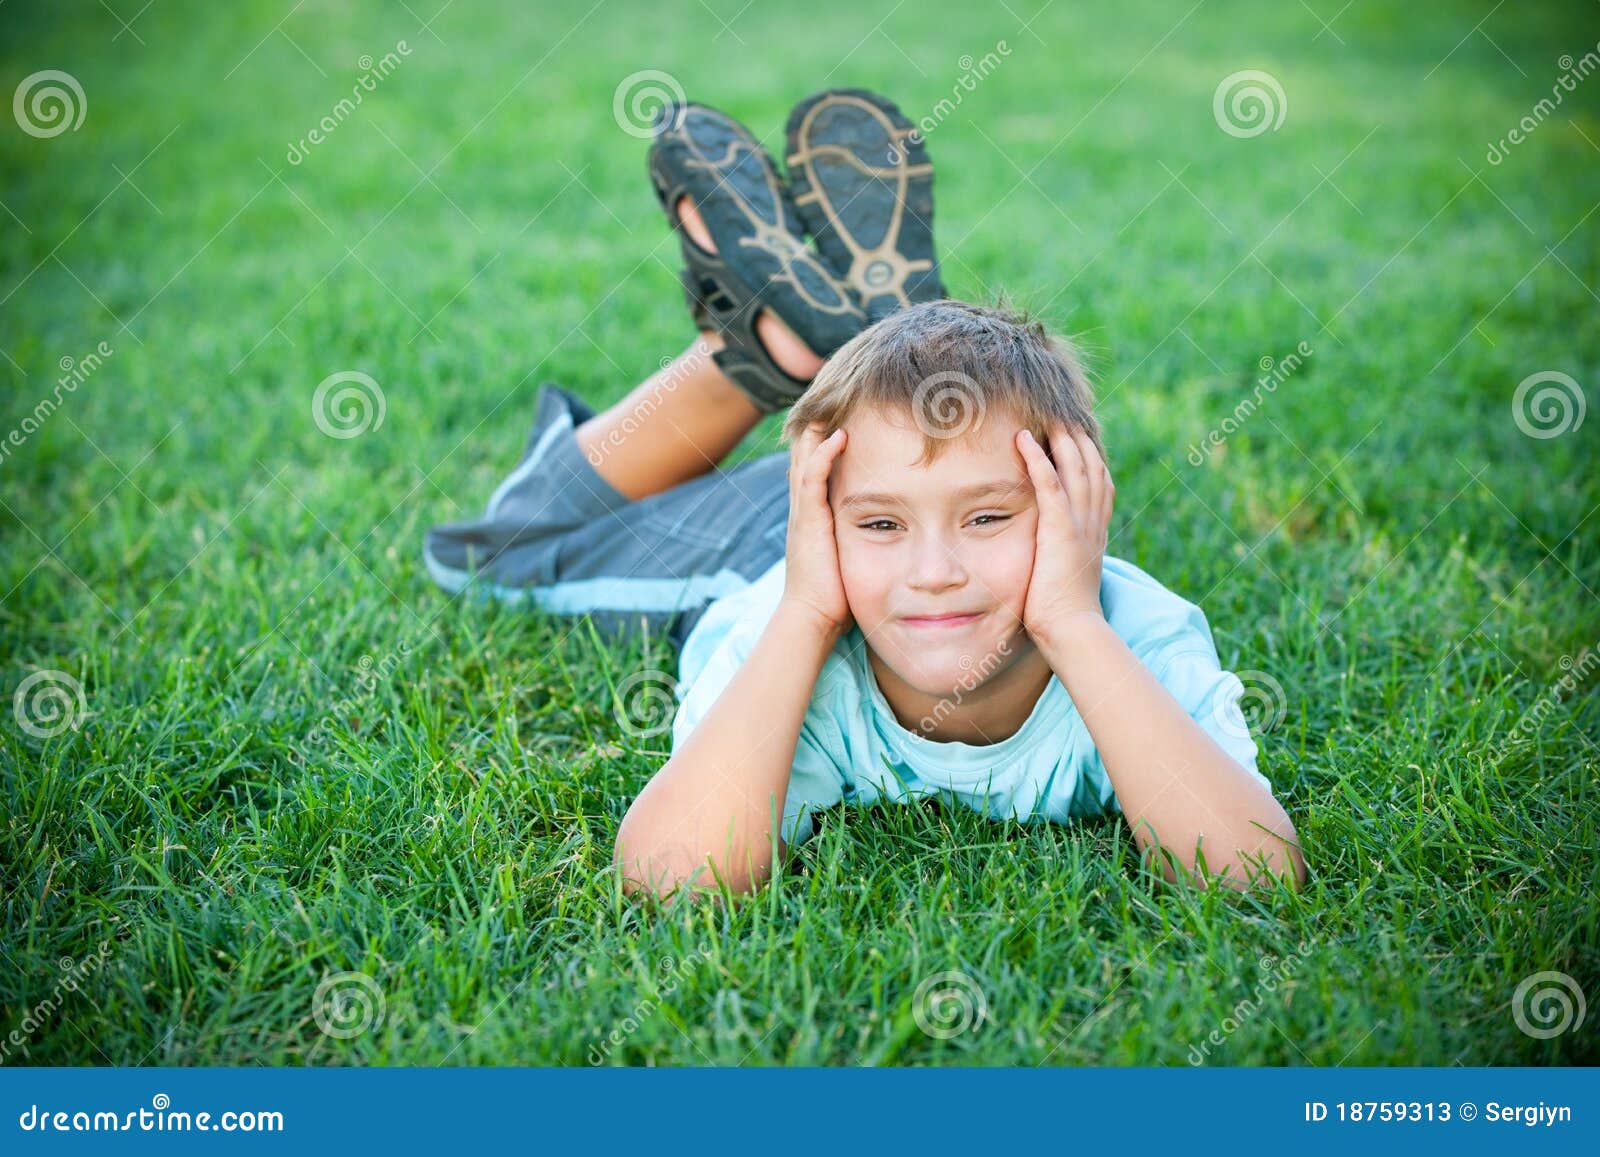 Funny Boy Lying On The Green Grass Stock Photos - Image: 18759313